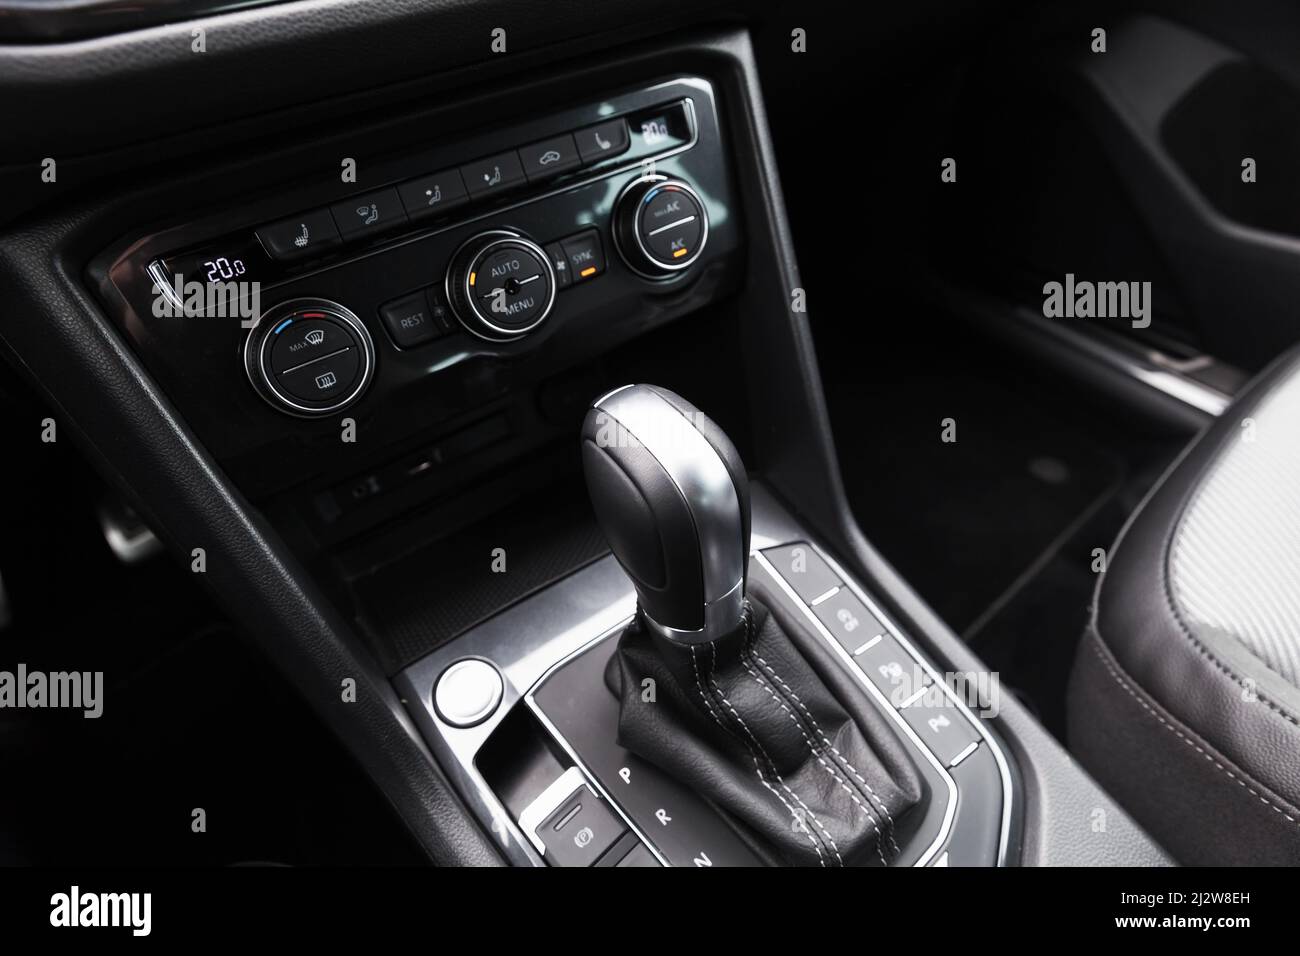 Gear lever and climate control panel of modern luxury crossover car. Close up photo with selective focus Stock Photo